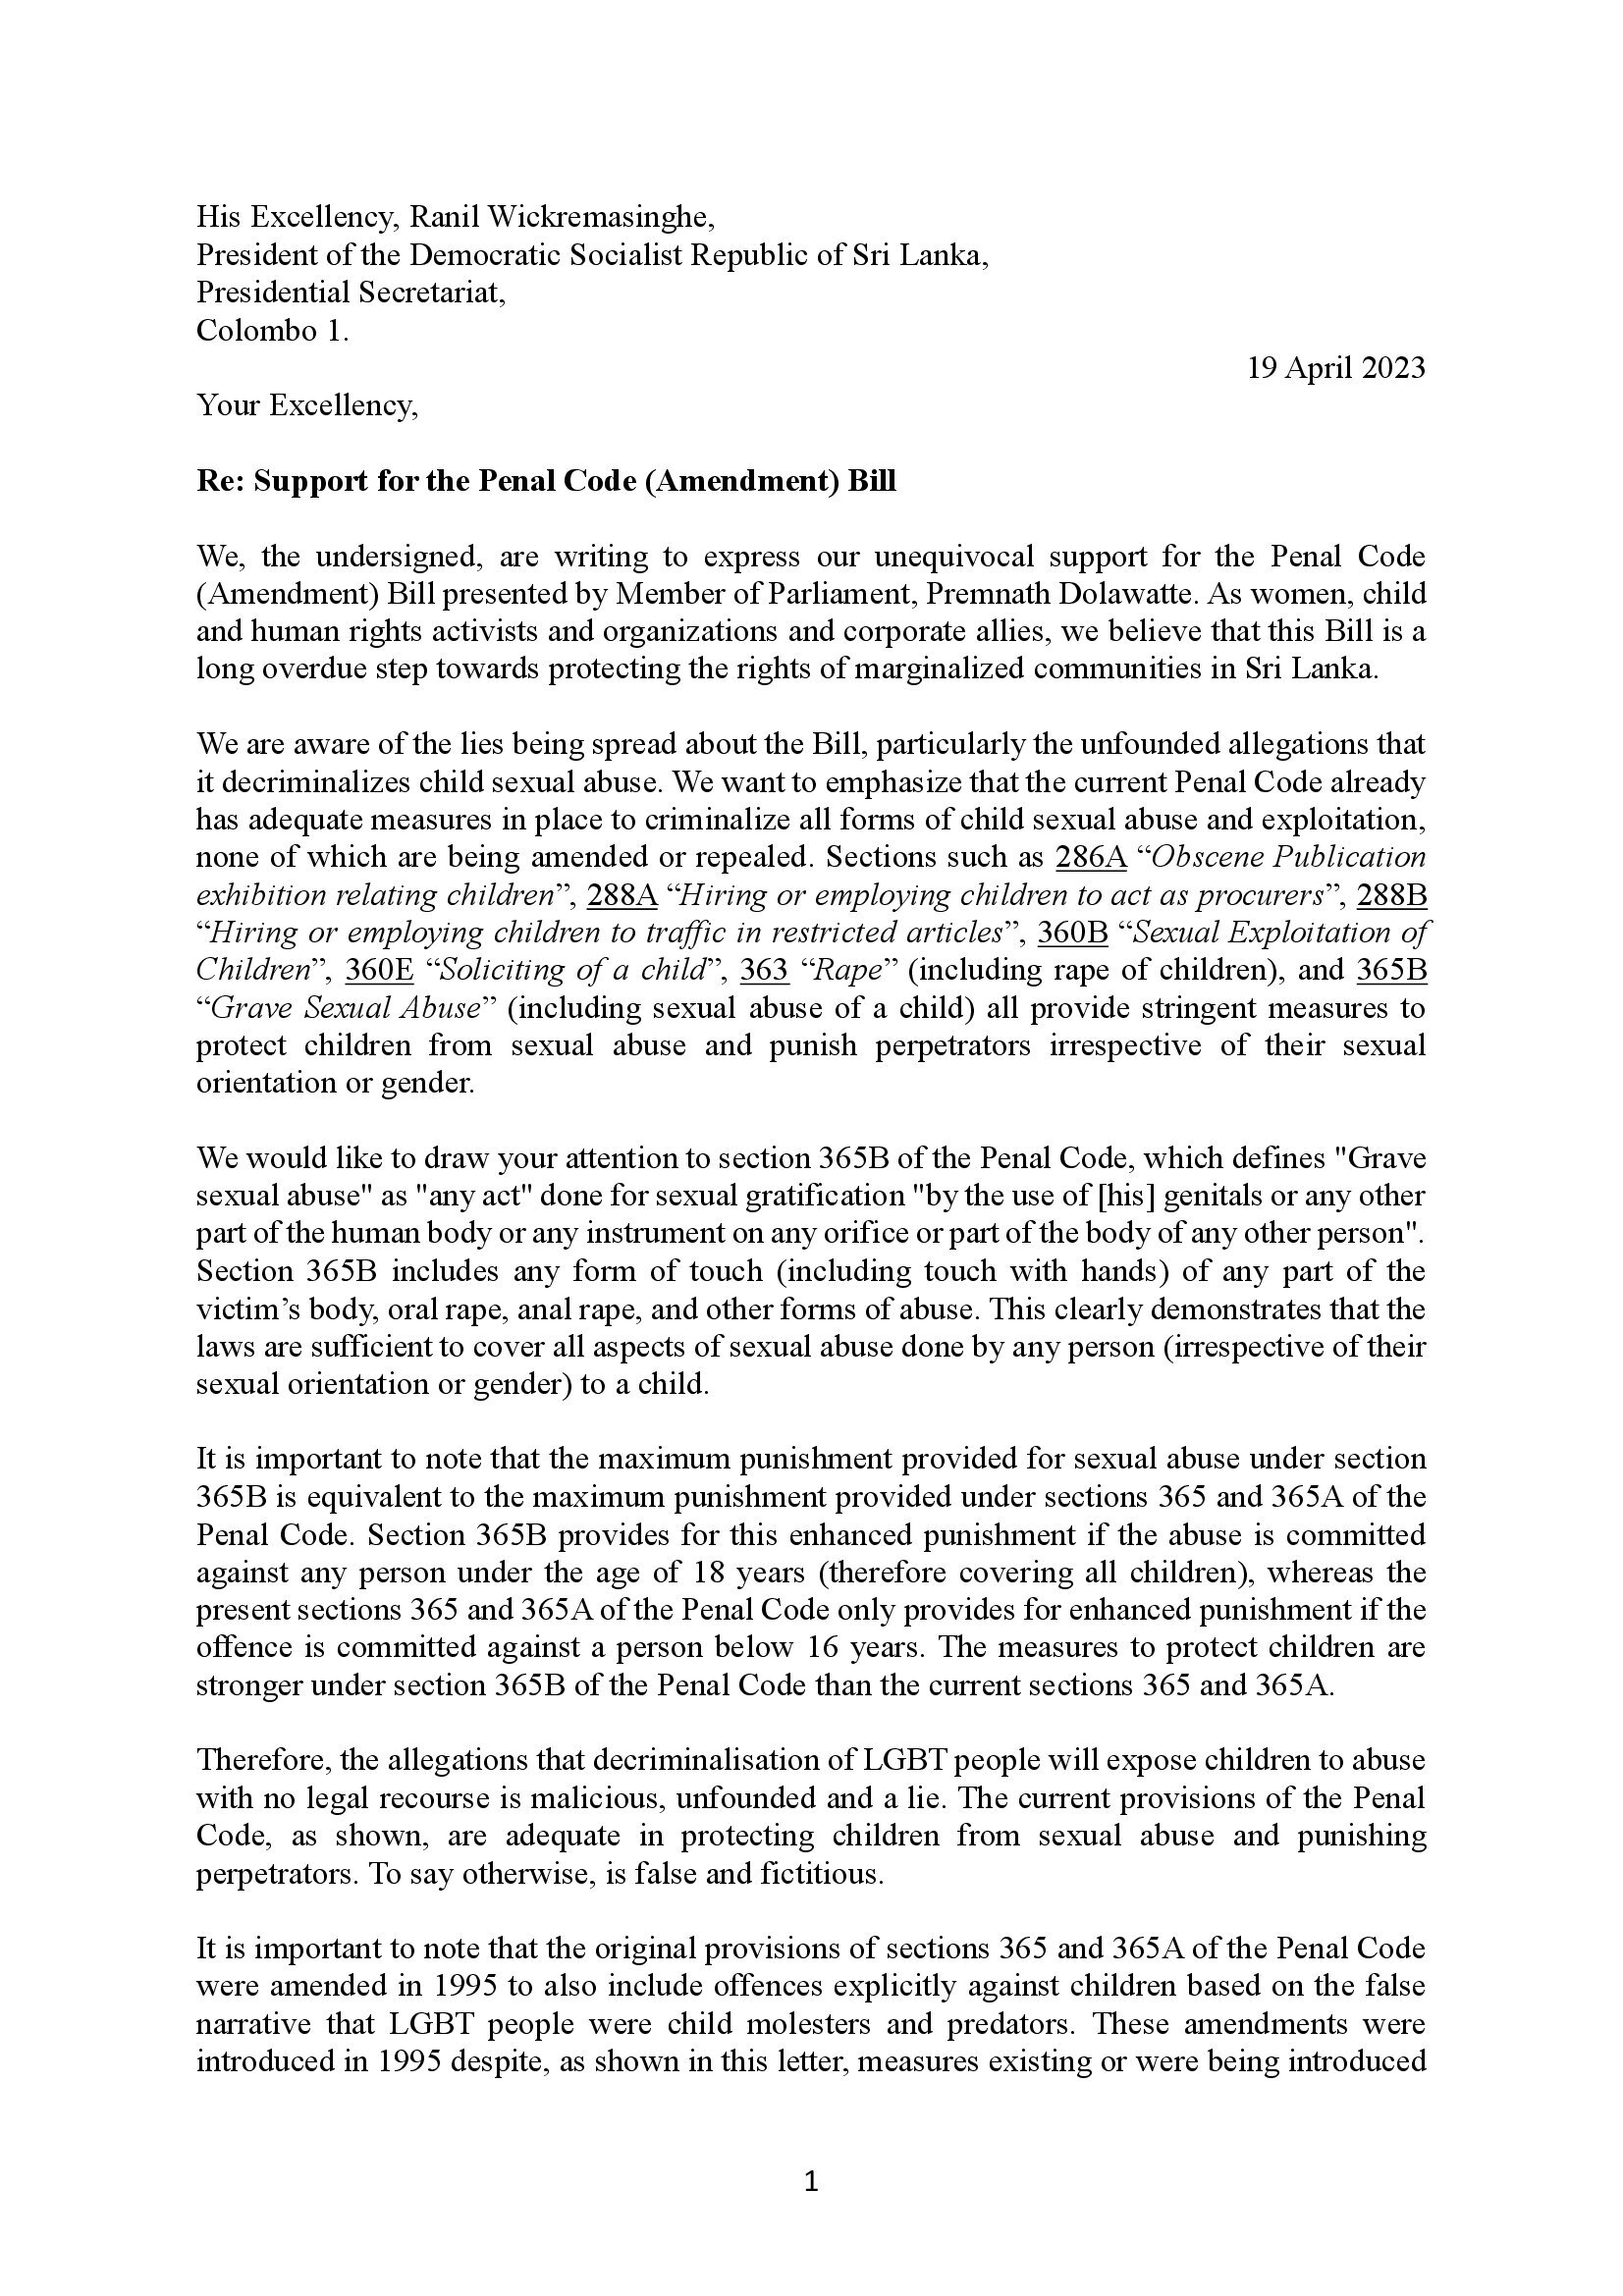 Letter to President supporting Decriminalisation and exposing lies 00001